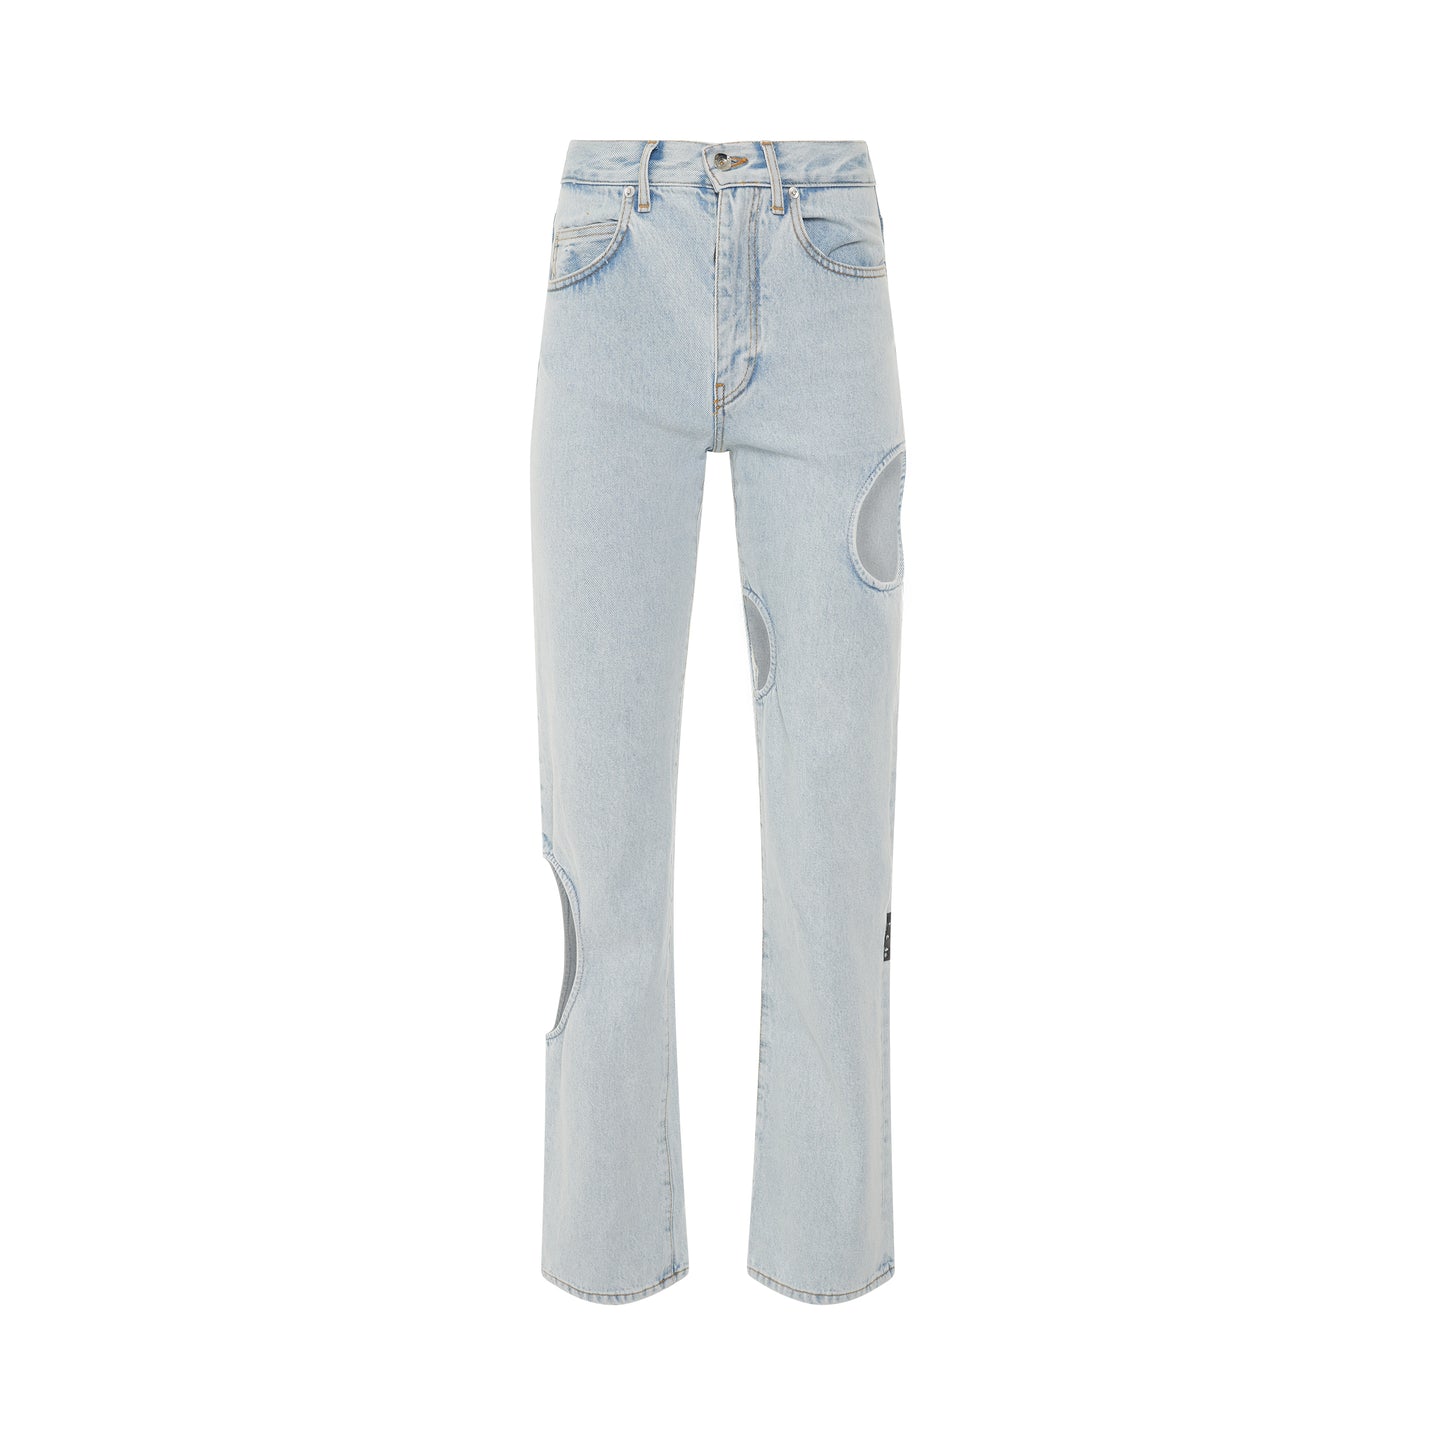 Meteor Cool Baggy Jeans in Light Blue